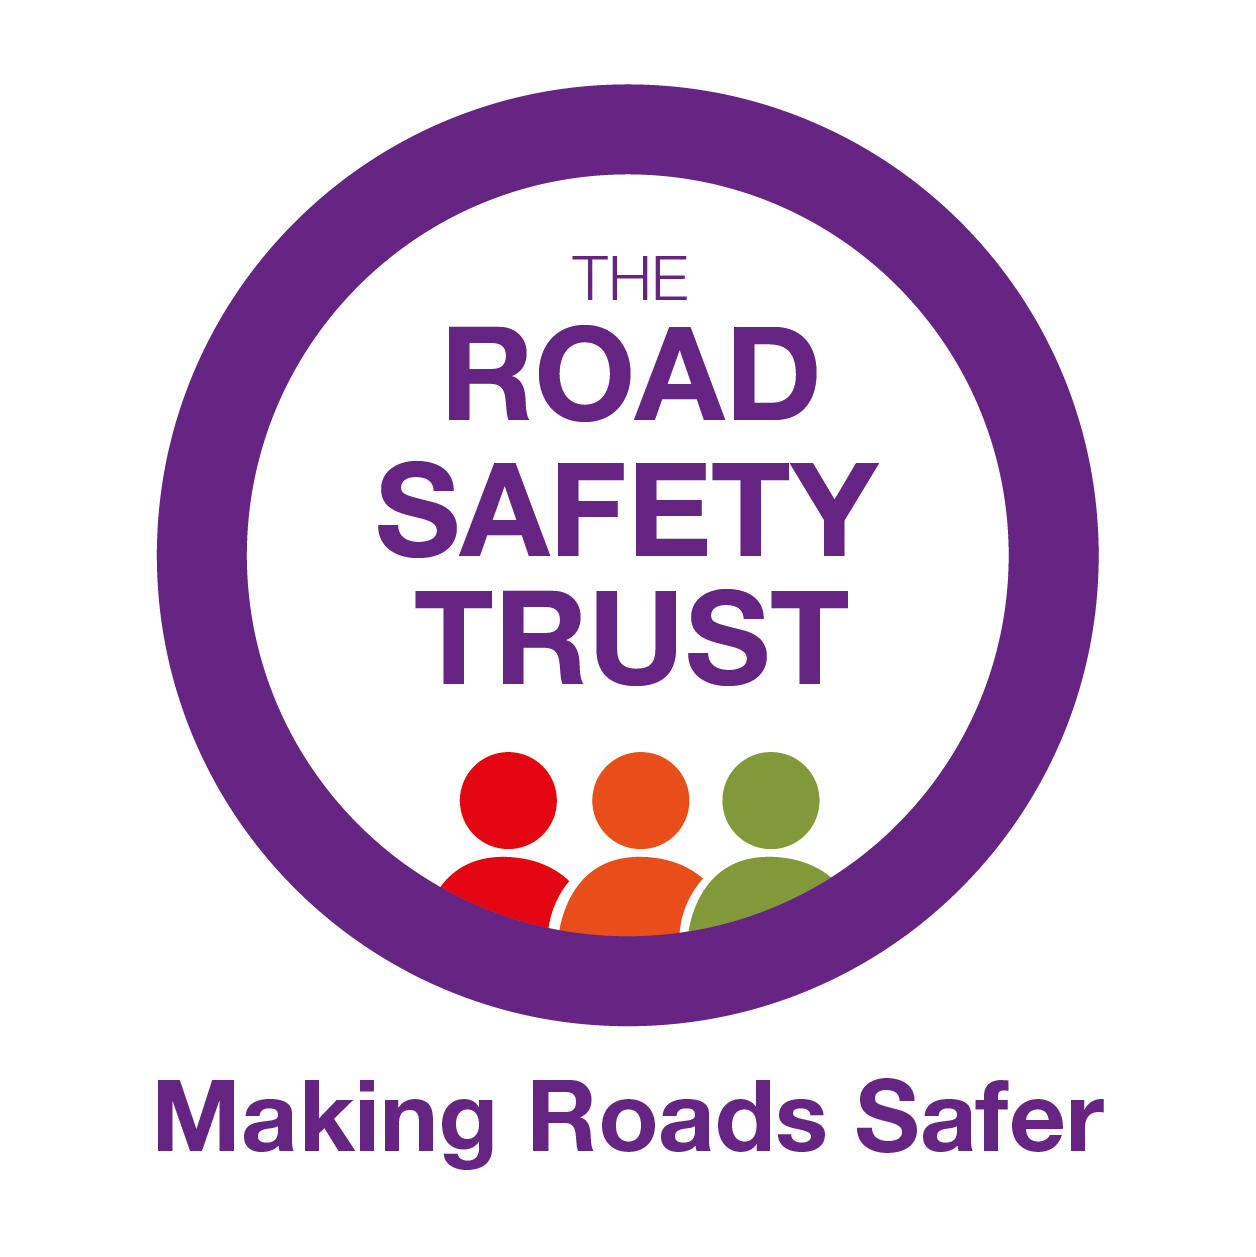 The Road Safety Trust